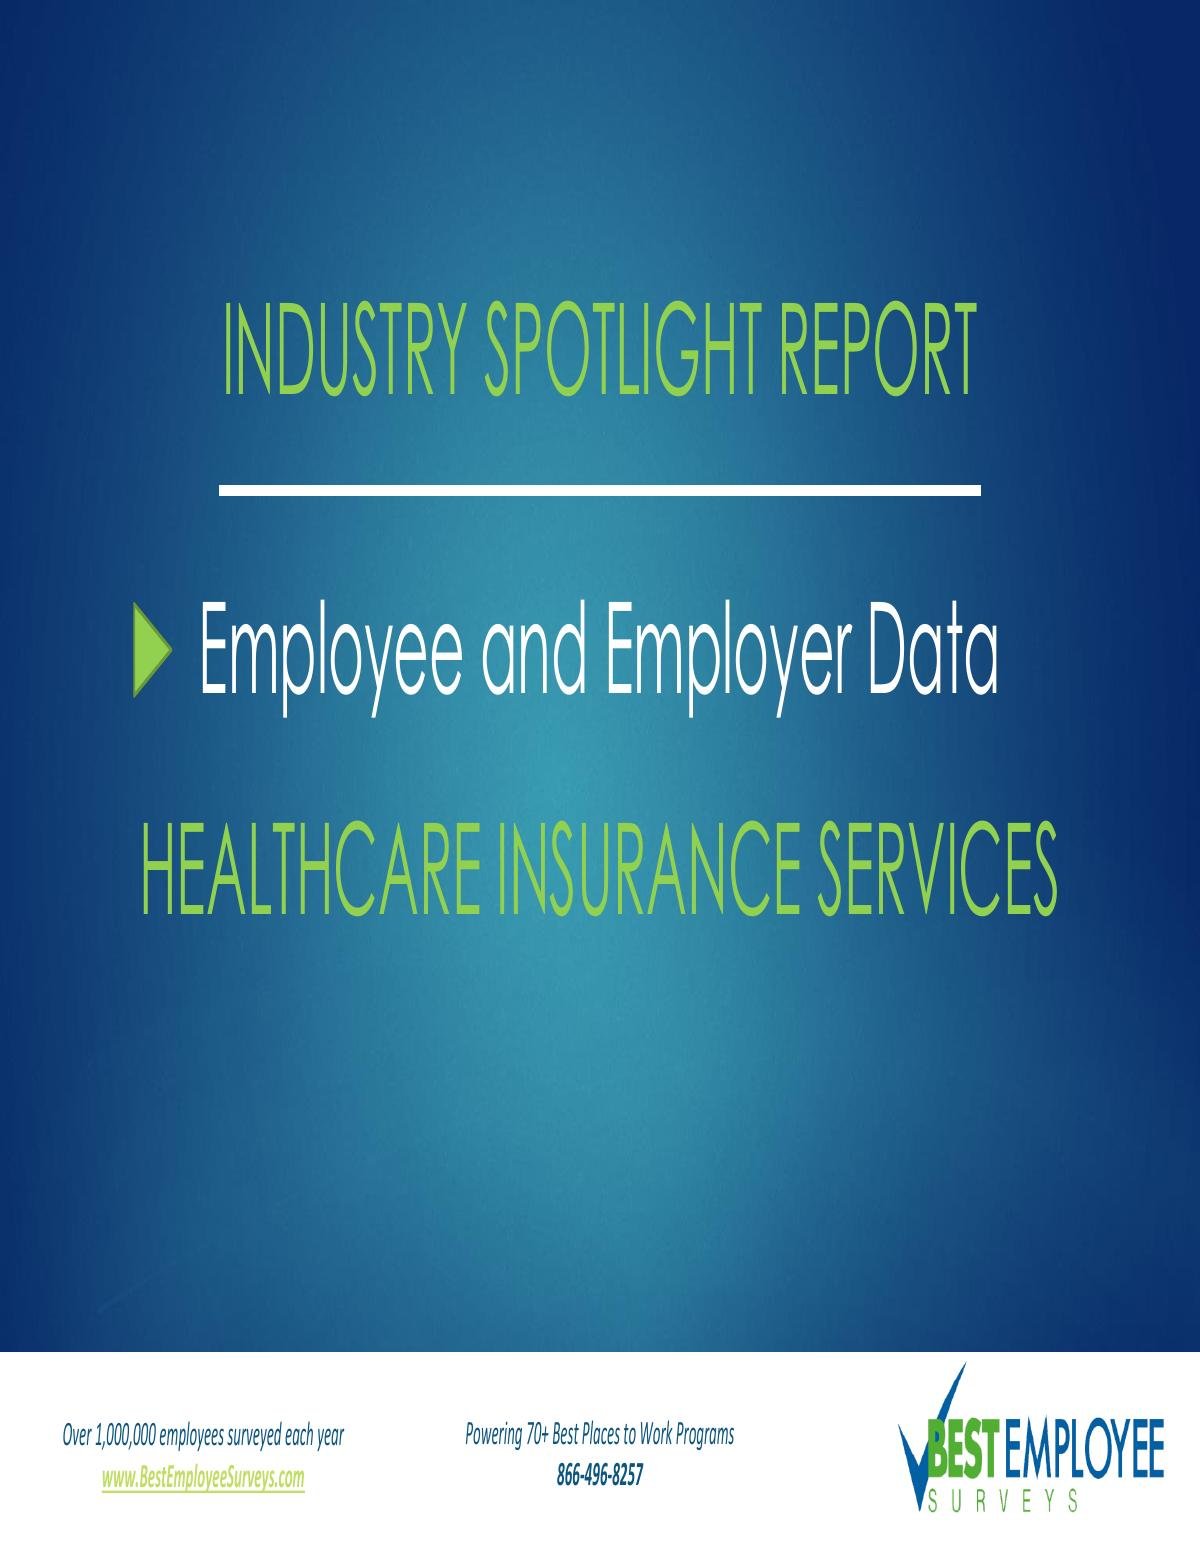 2019 Employee Engagement and Satisfaction Report: Healthcare Insurance Services